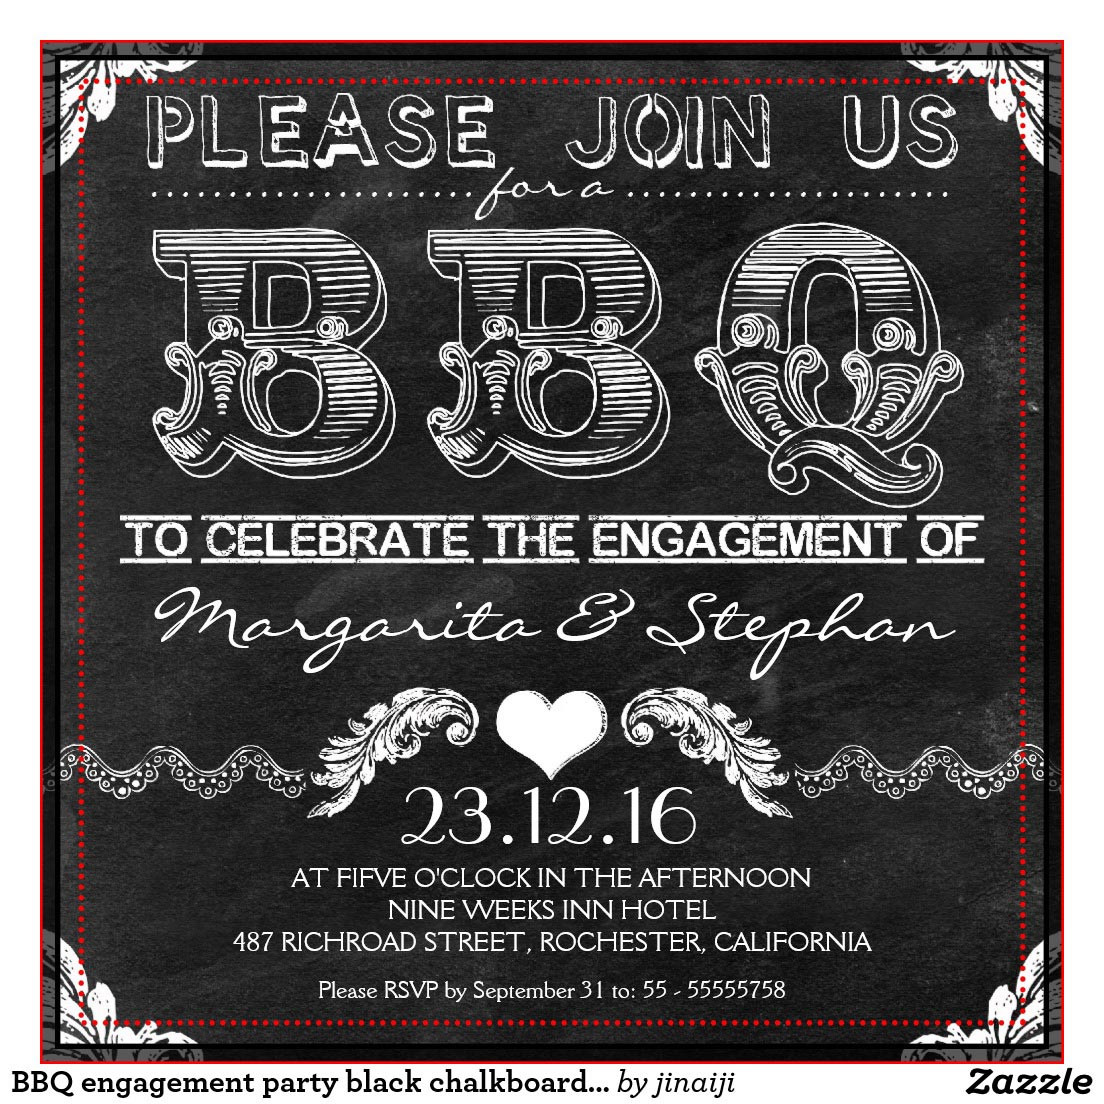 Engagement Party Invitations Ideas
 I Do BBQ Engagement Party Invitations